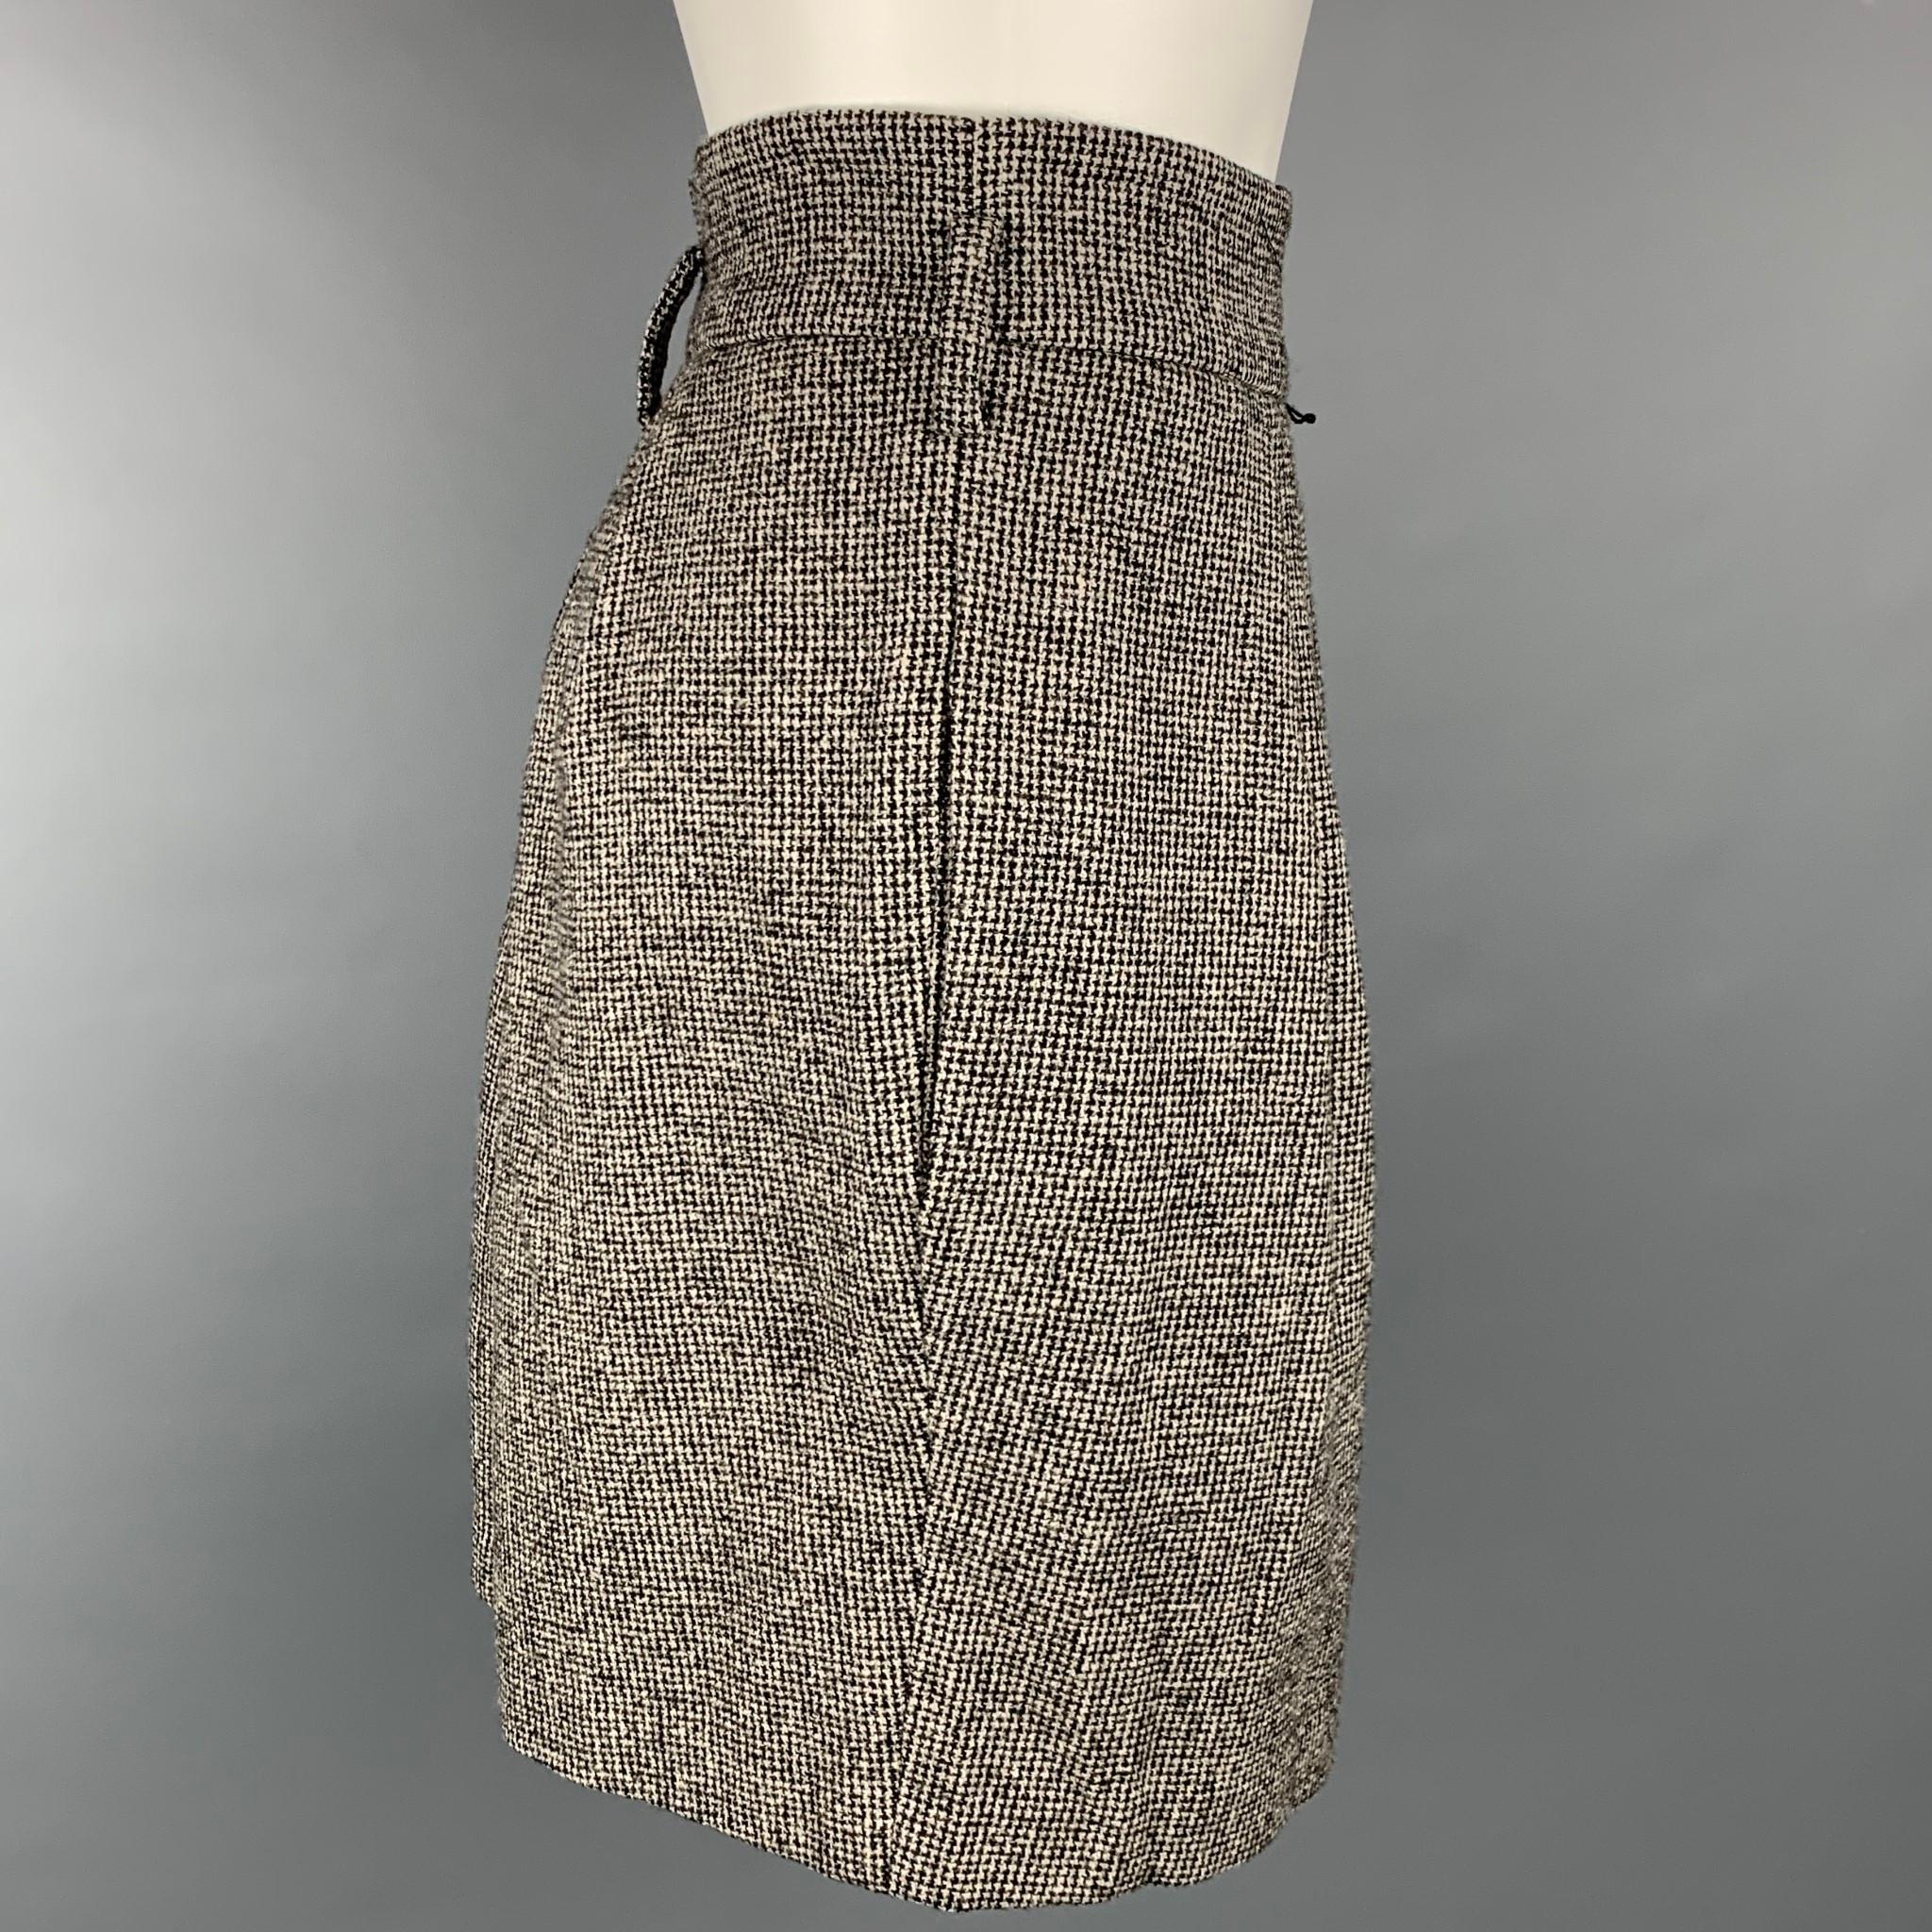 ROBERT RODRIGUEZ skirt comes in a black & cream houndstooth wool / polyester with a slip liner featuring a pleated style, wide waistband, belt loops, slit pockets, and a back zipper closure.

Very Good Pre-Owned Condition.
Marked: